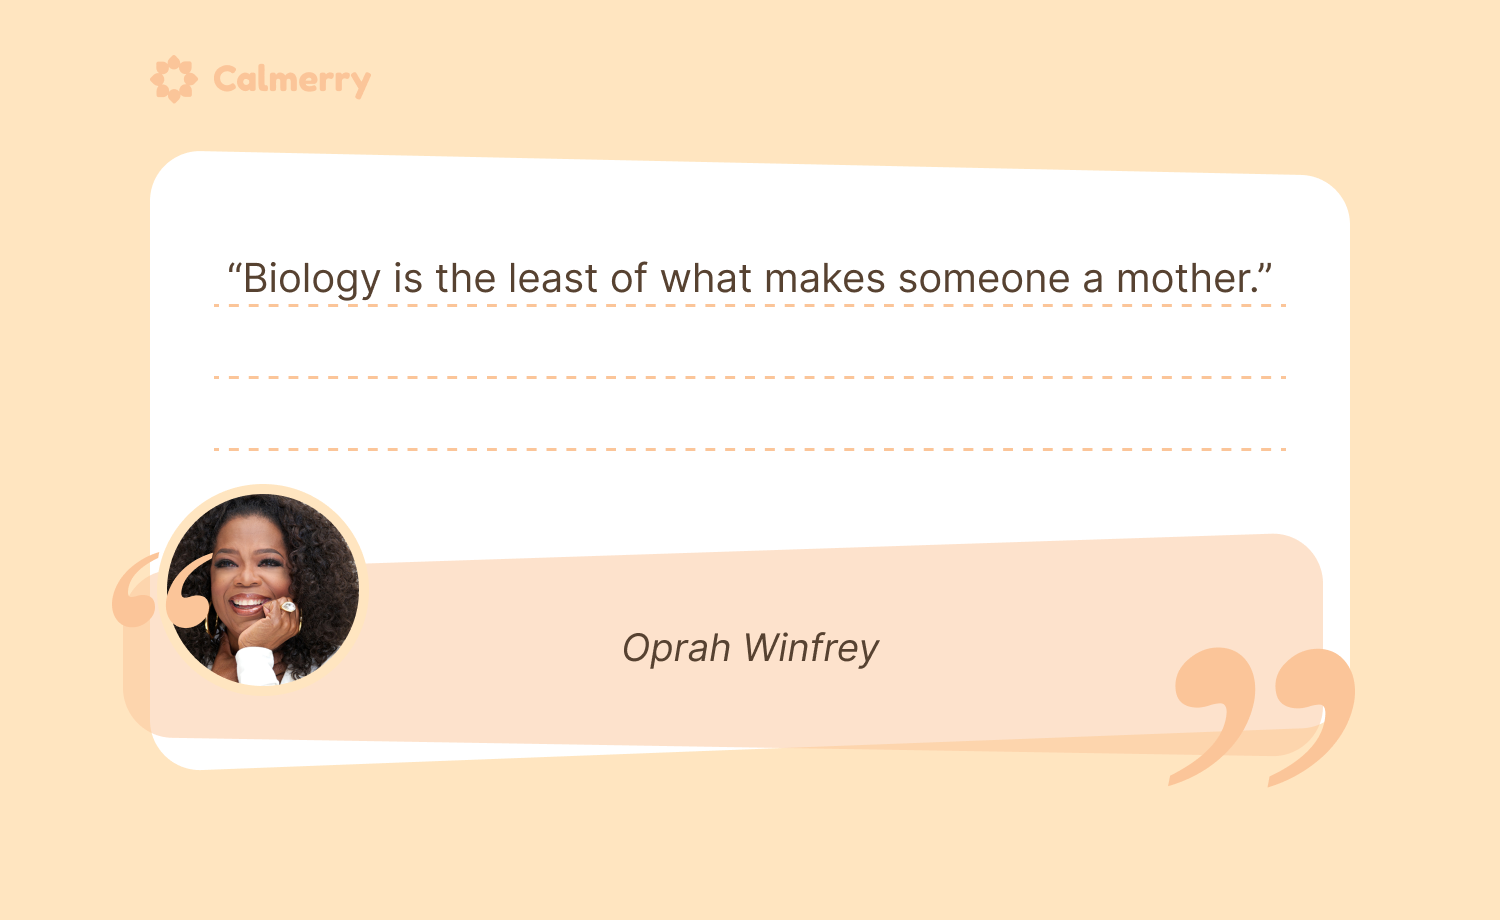 Biology is the least of what makes someone a mother